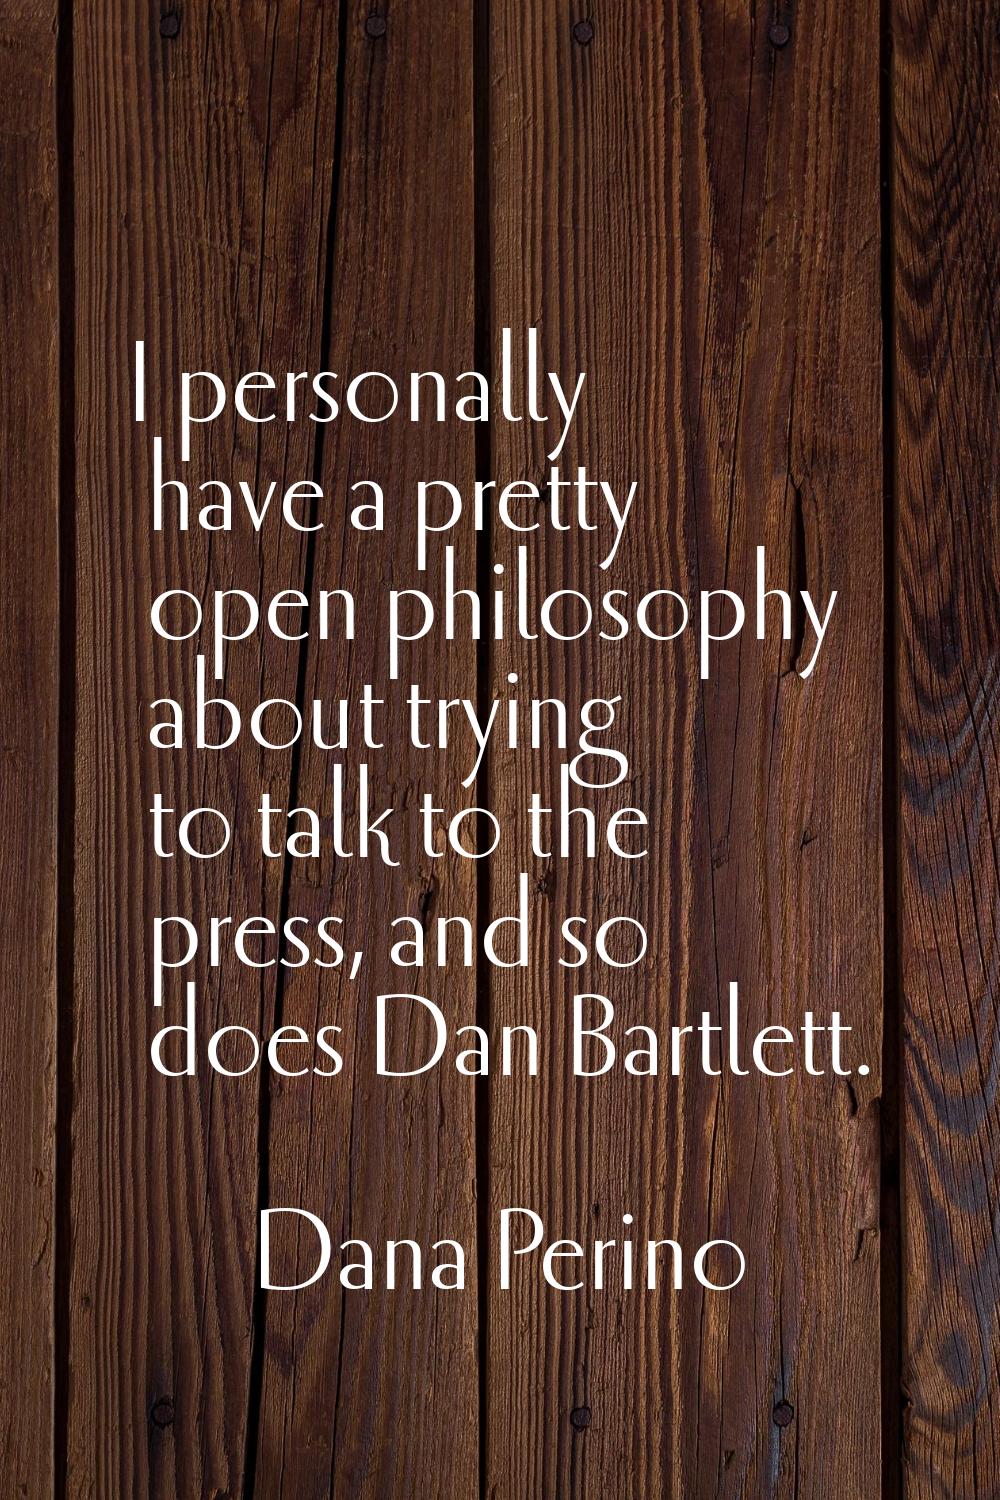 I personally have a pretty open philosophy about trying to talk to the press, and so does Dan Bartl